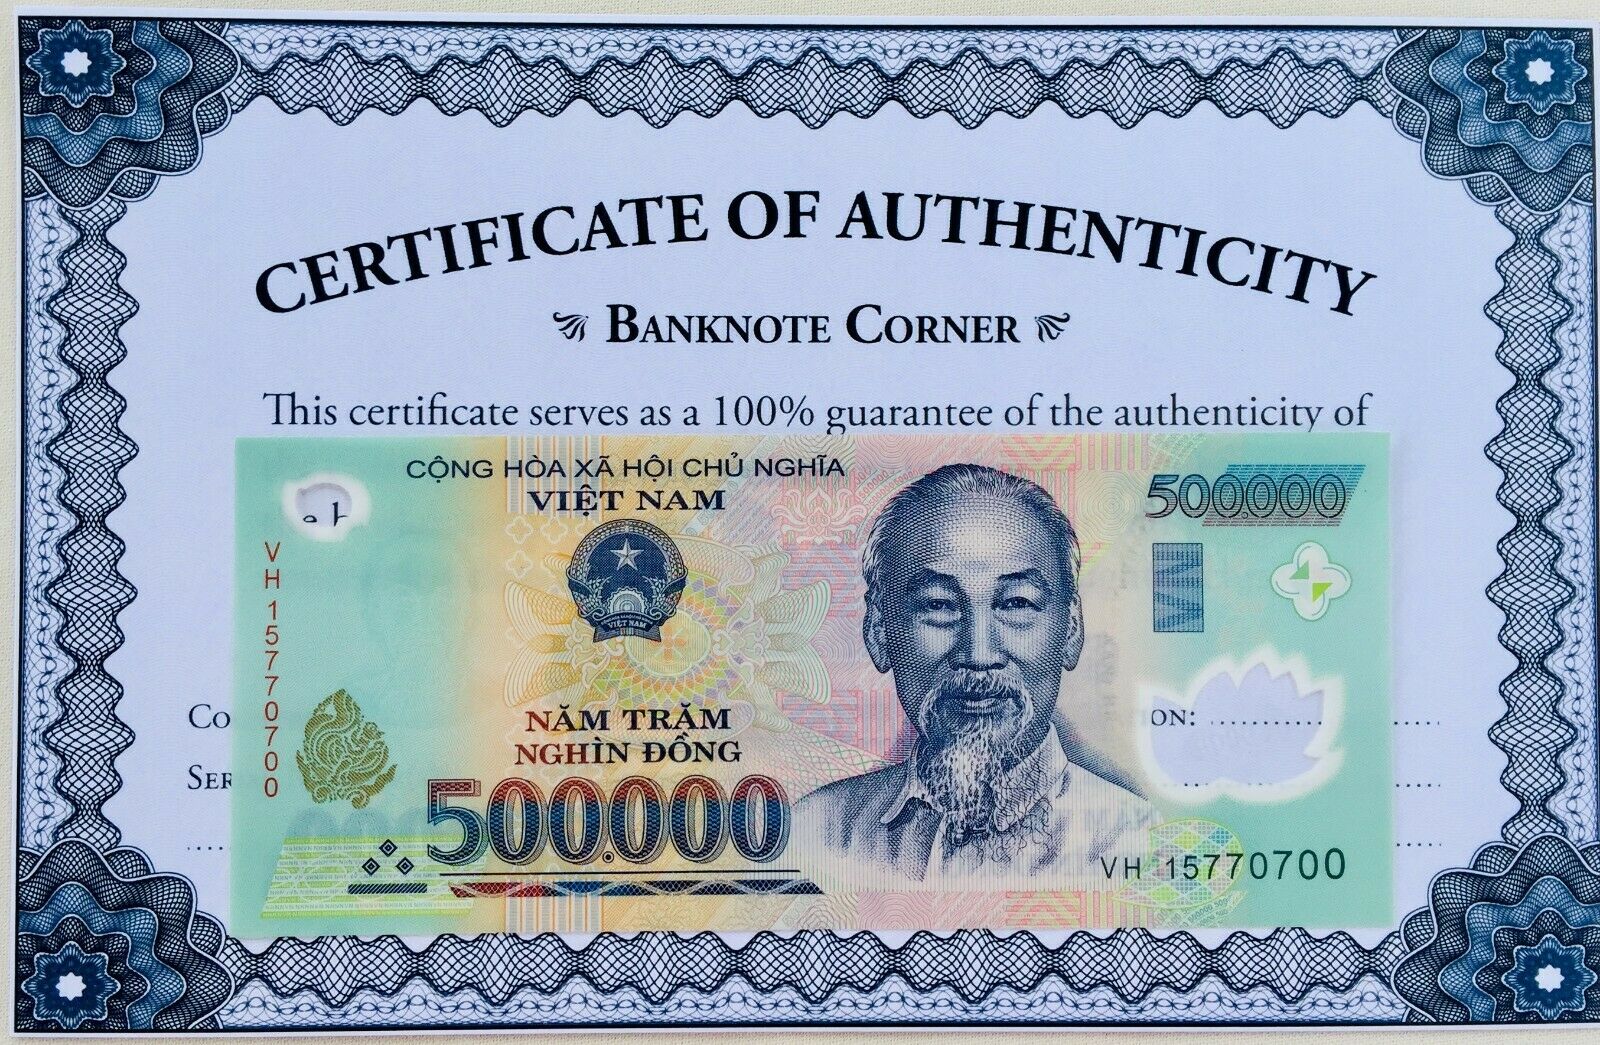 500000 Vietnam Dong 500,000 Lightly "circulated" Uv Pass Coa Authentic Fast Ship